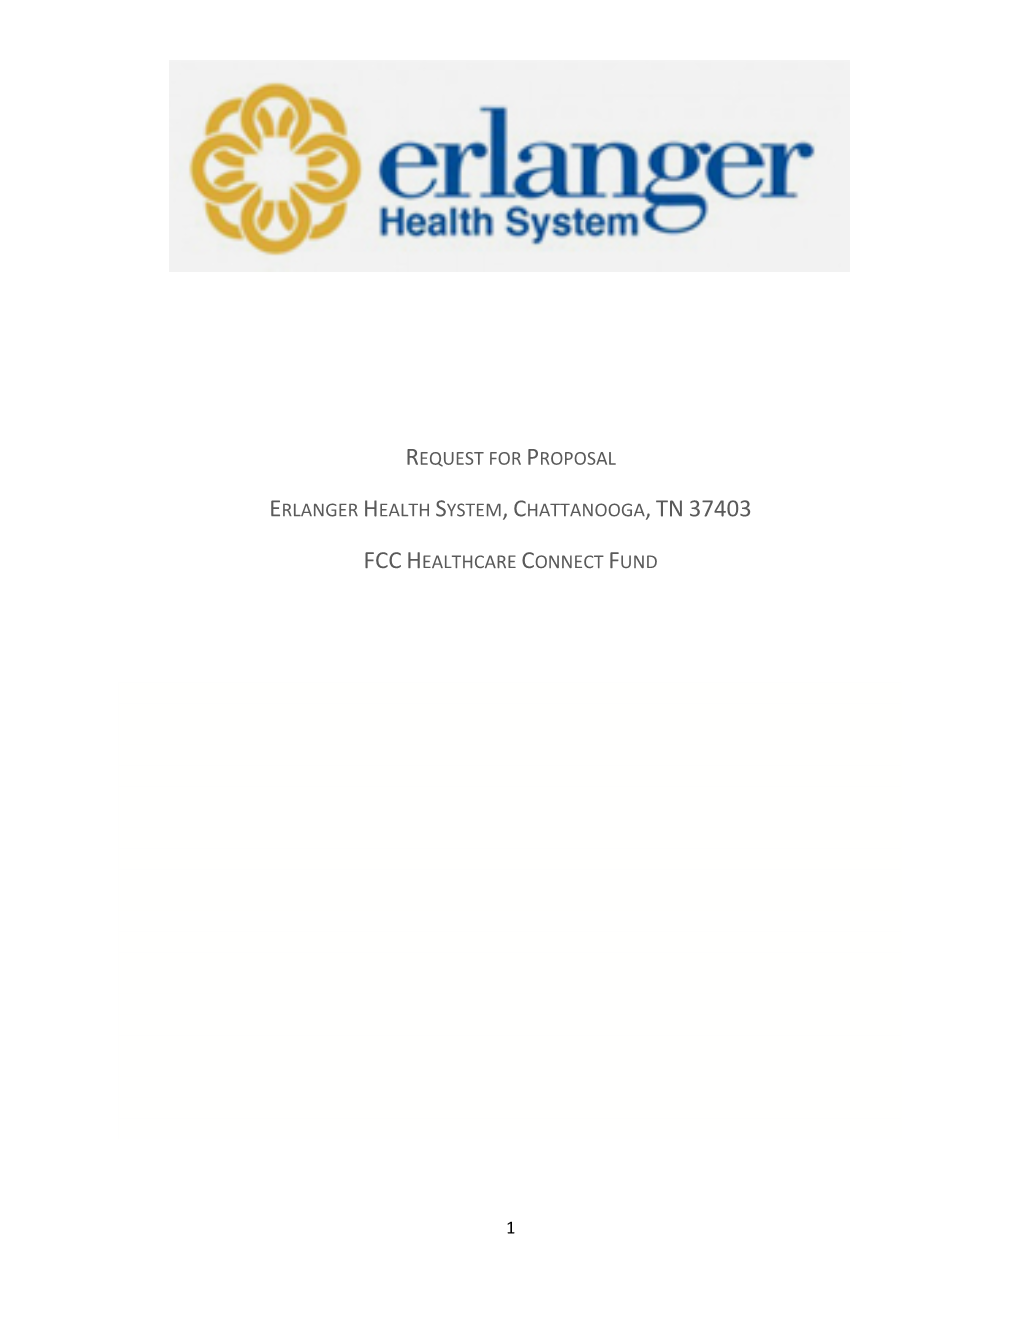 Request for Proposal Erlanger Health System, Chattanooga, Tn 37403 Fcc Healthcare Connect Fund